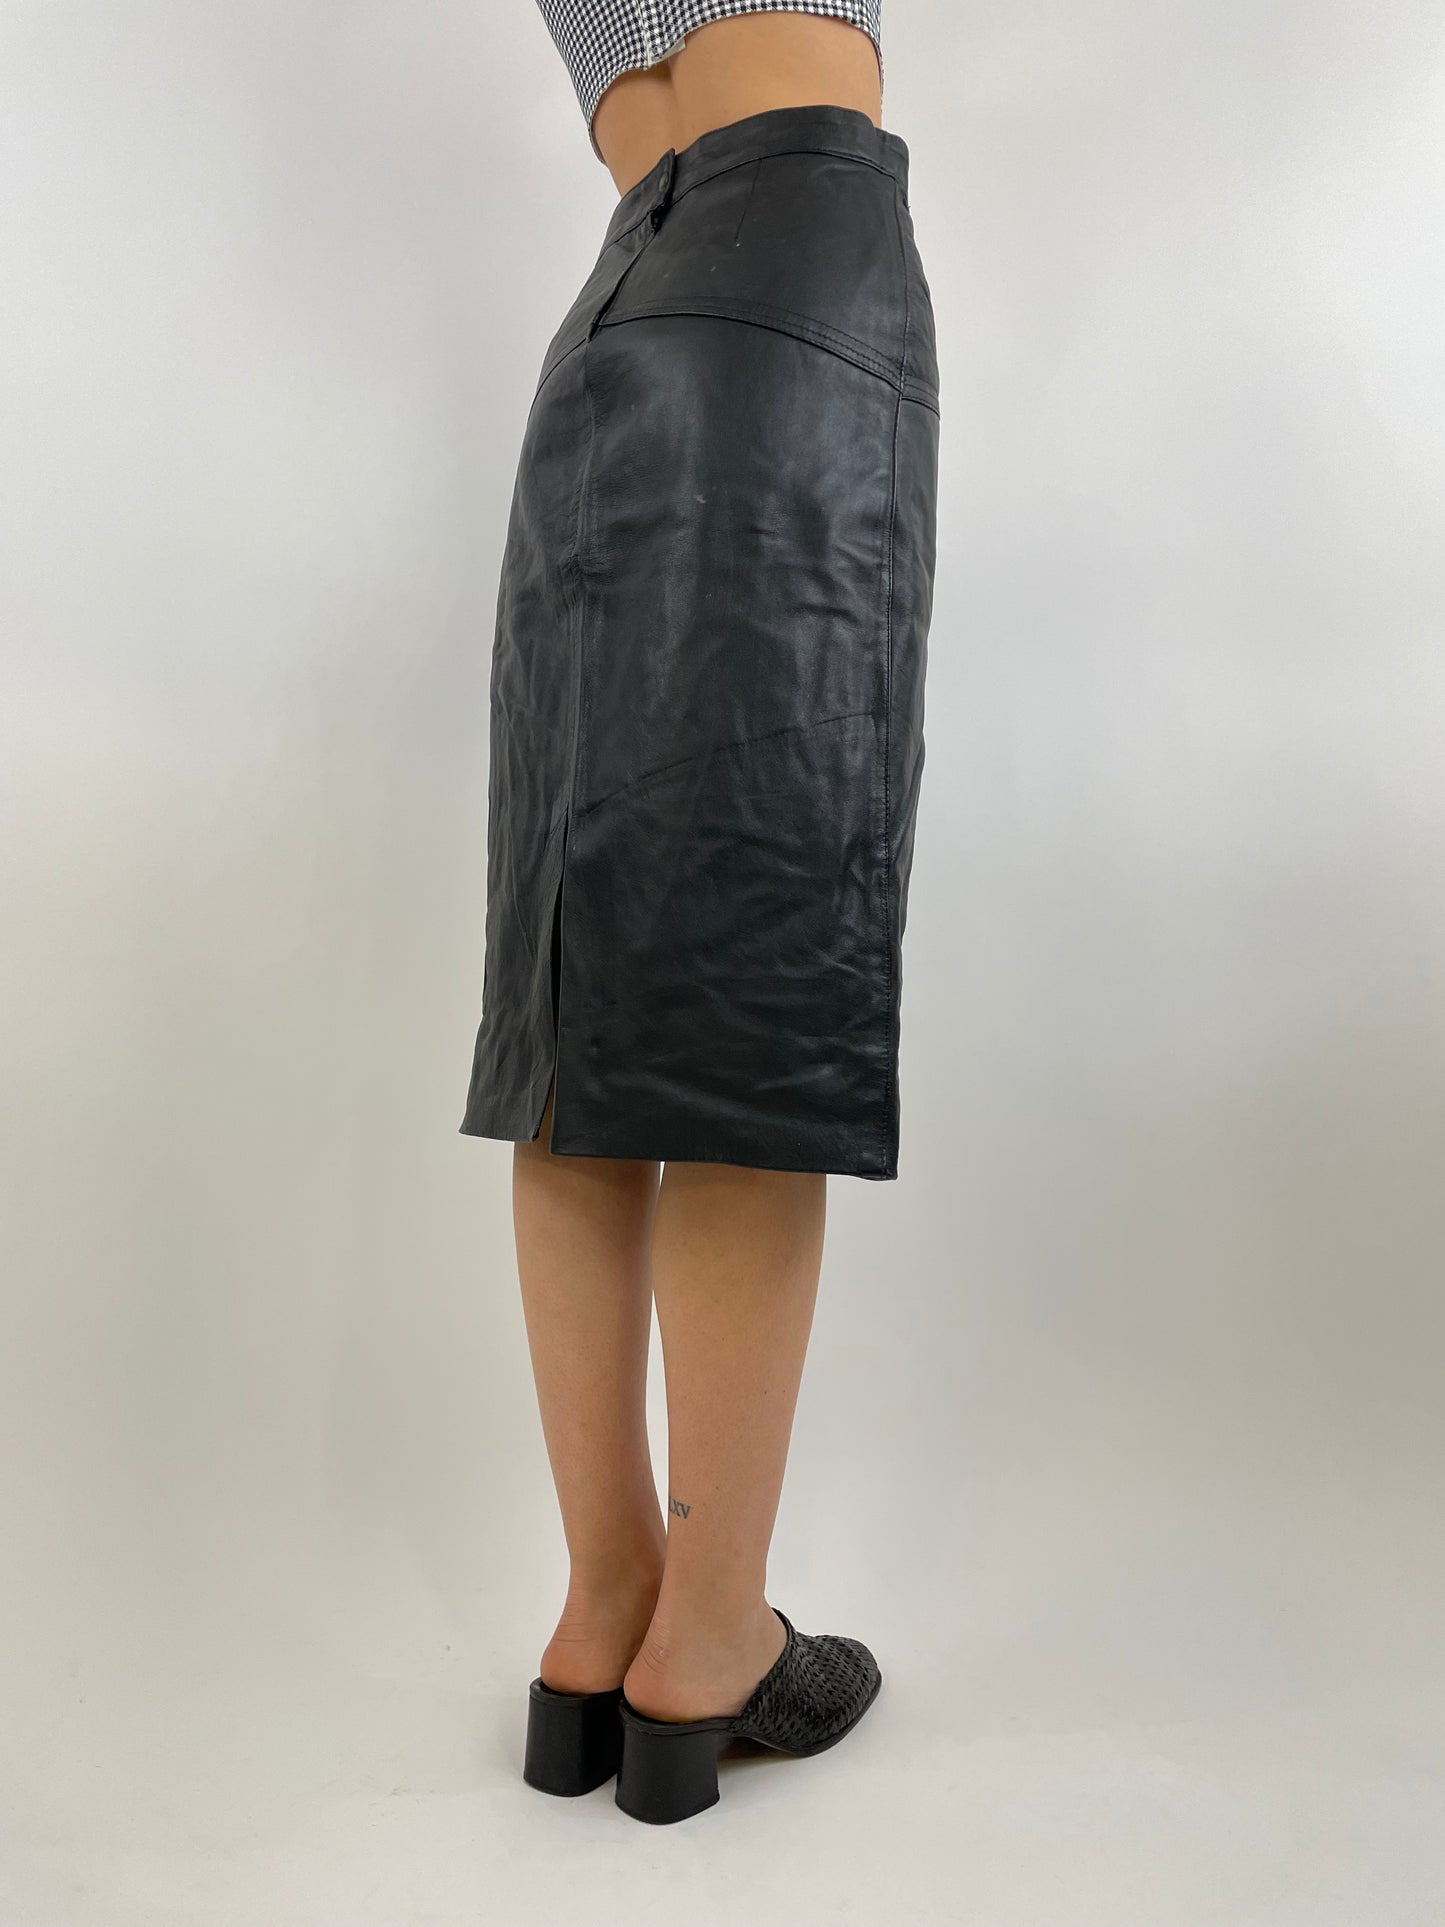 1980s pencil skirt - Genuine leather